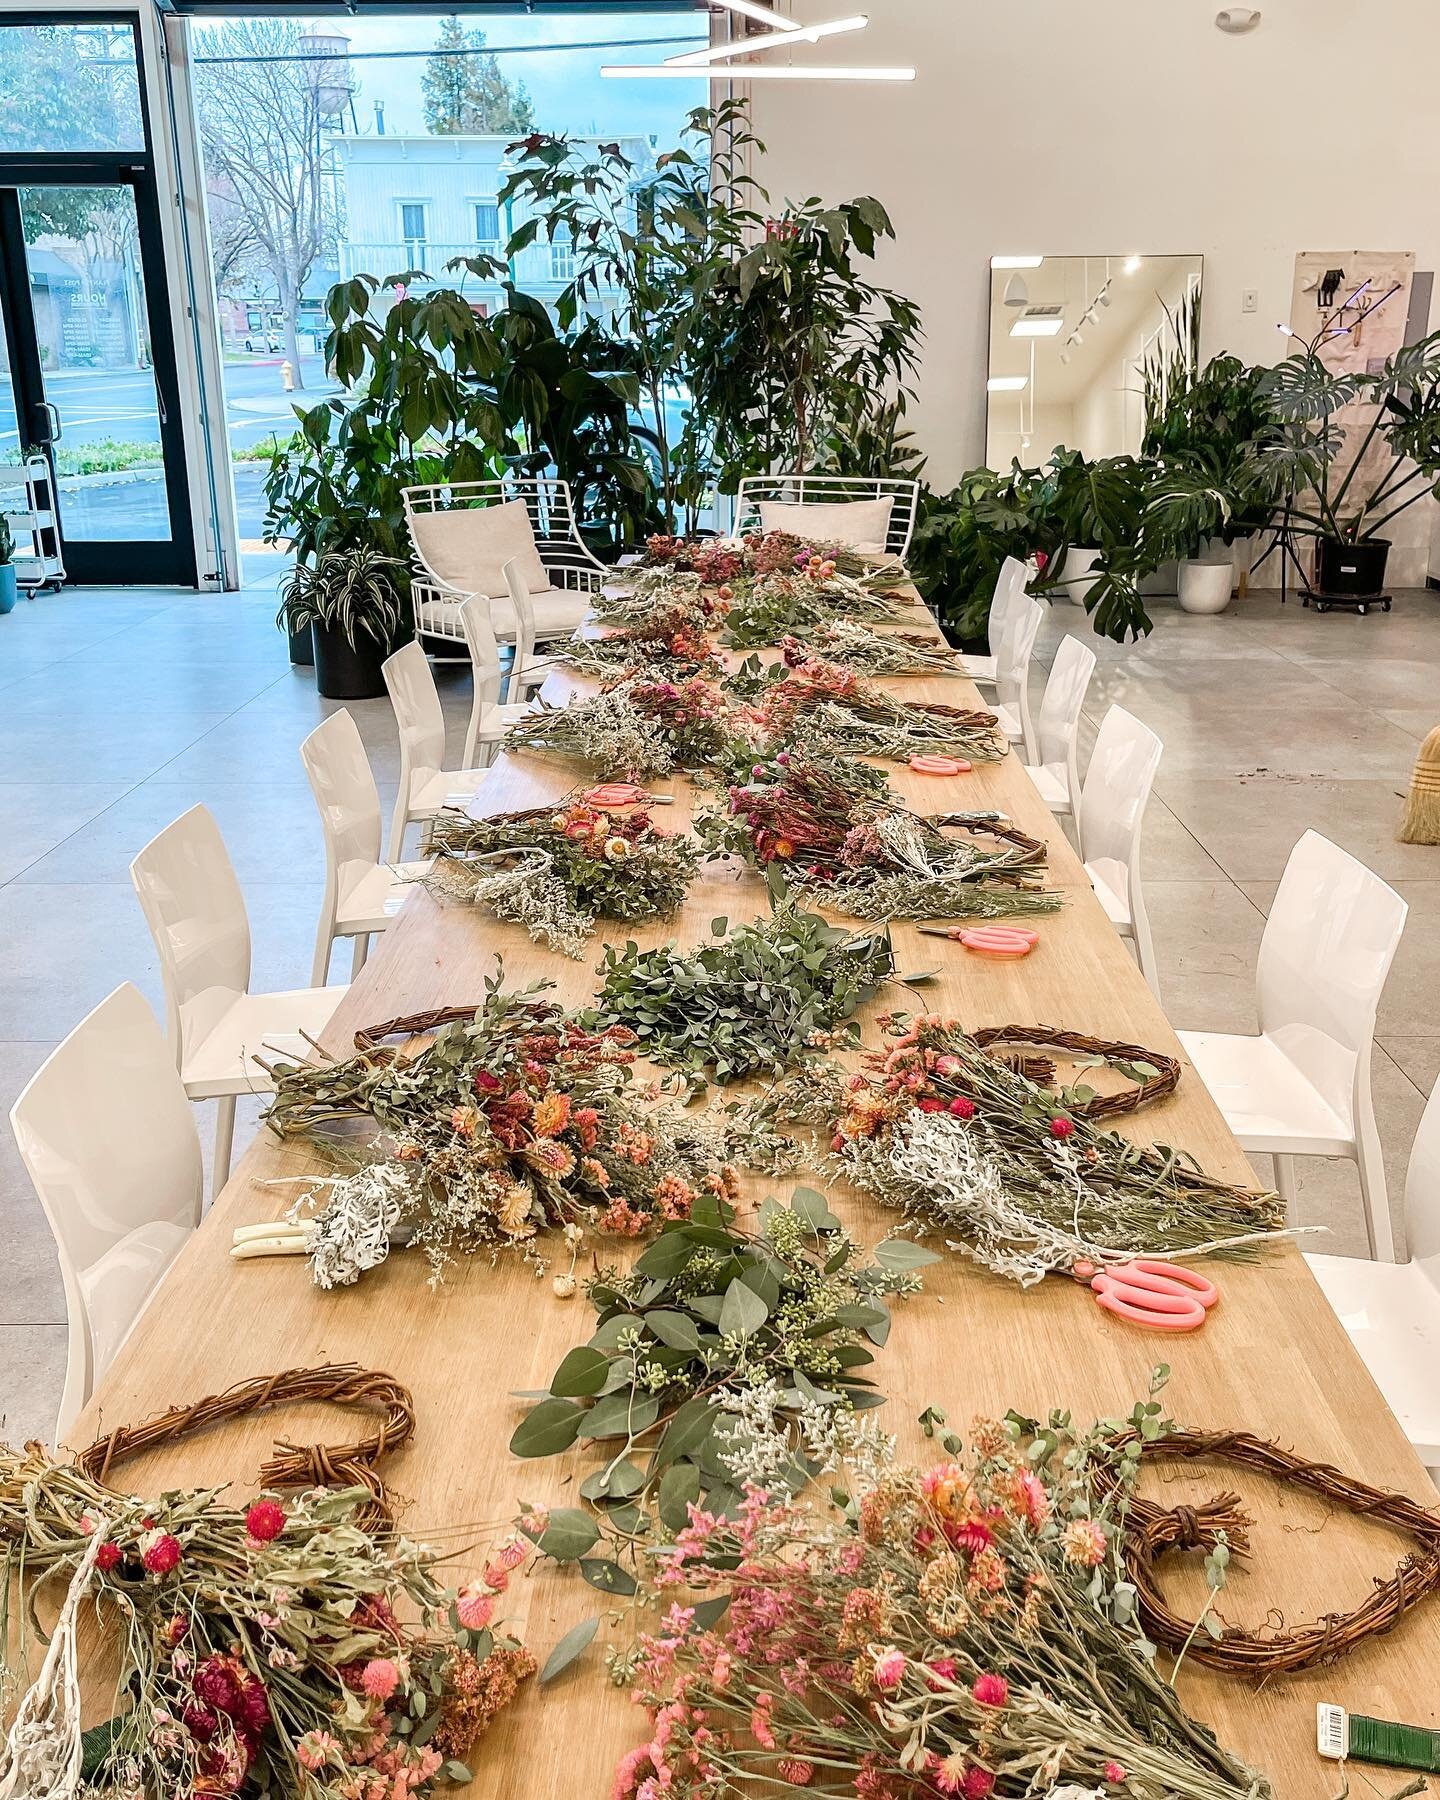 Galentine&rsquo;s day at Plants by Post 💕 Heart shaped wreath making workshop with @bloomsandheart 😍